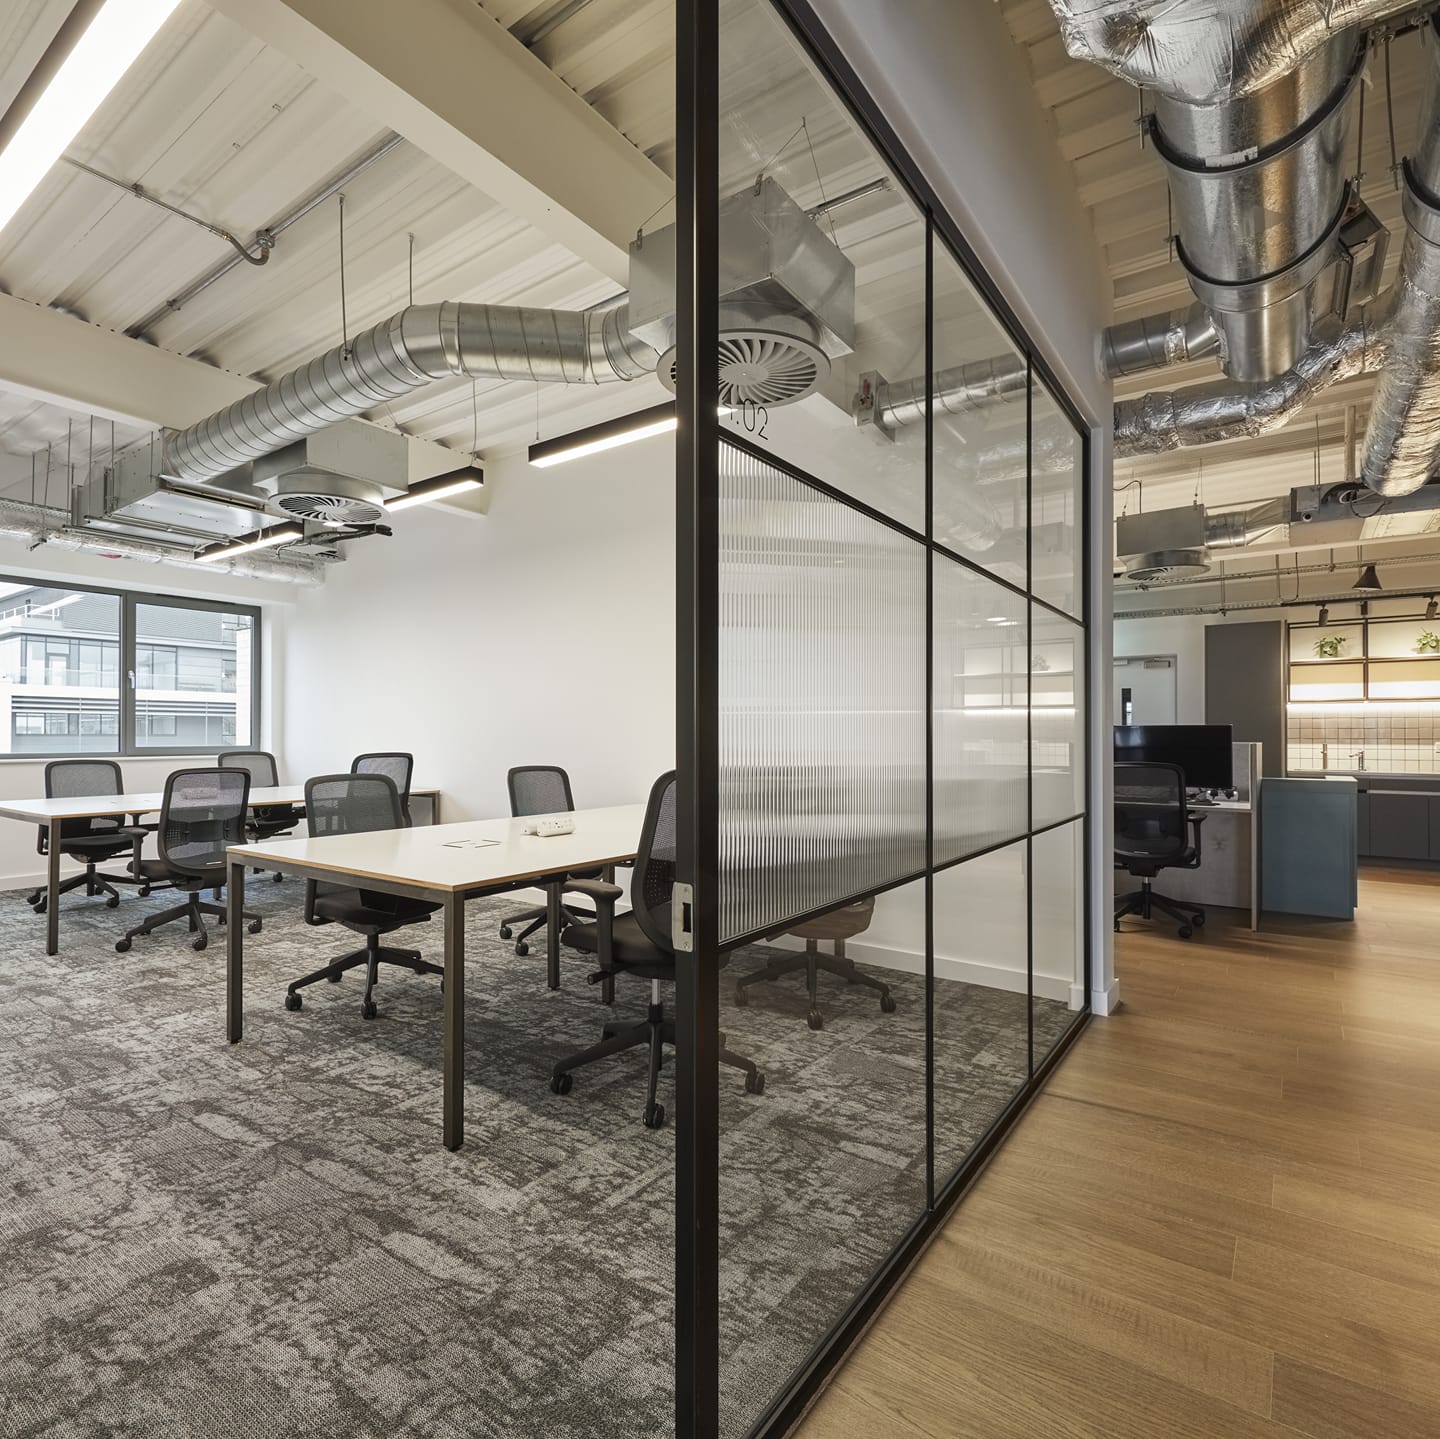 Flexible workspace operator Clockwise arrives in Manchester